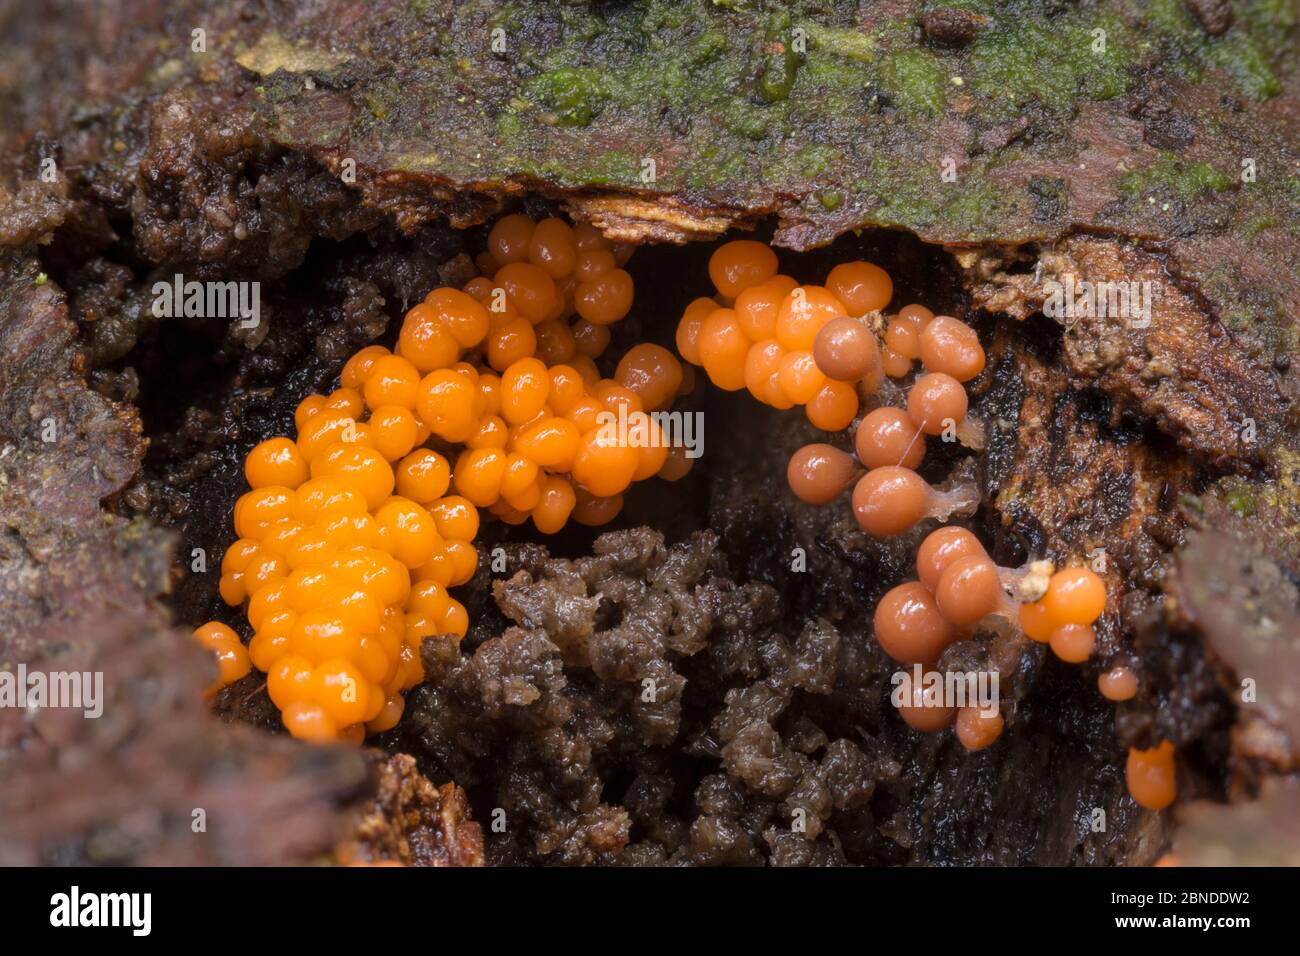 Slime mould (Trichia decipiens) fruiting bodies on decaying wood. Peak District National Park, Derbyshire, UK. October. Stock Photo